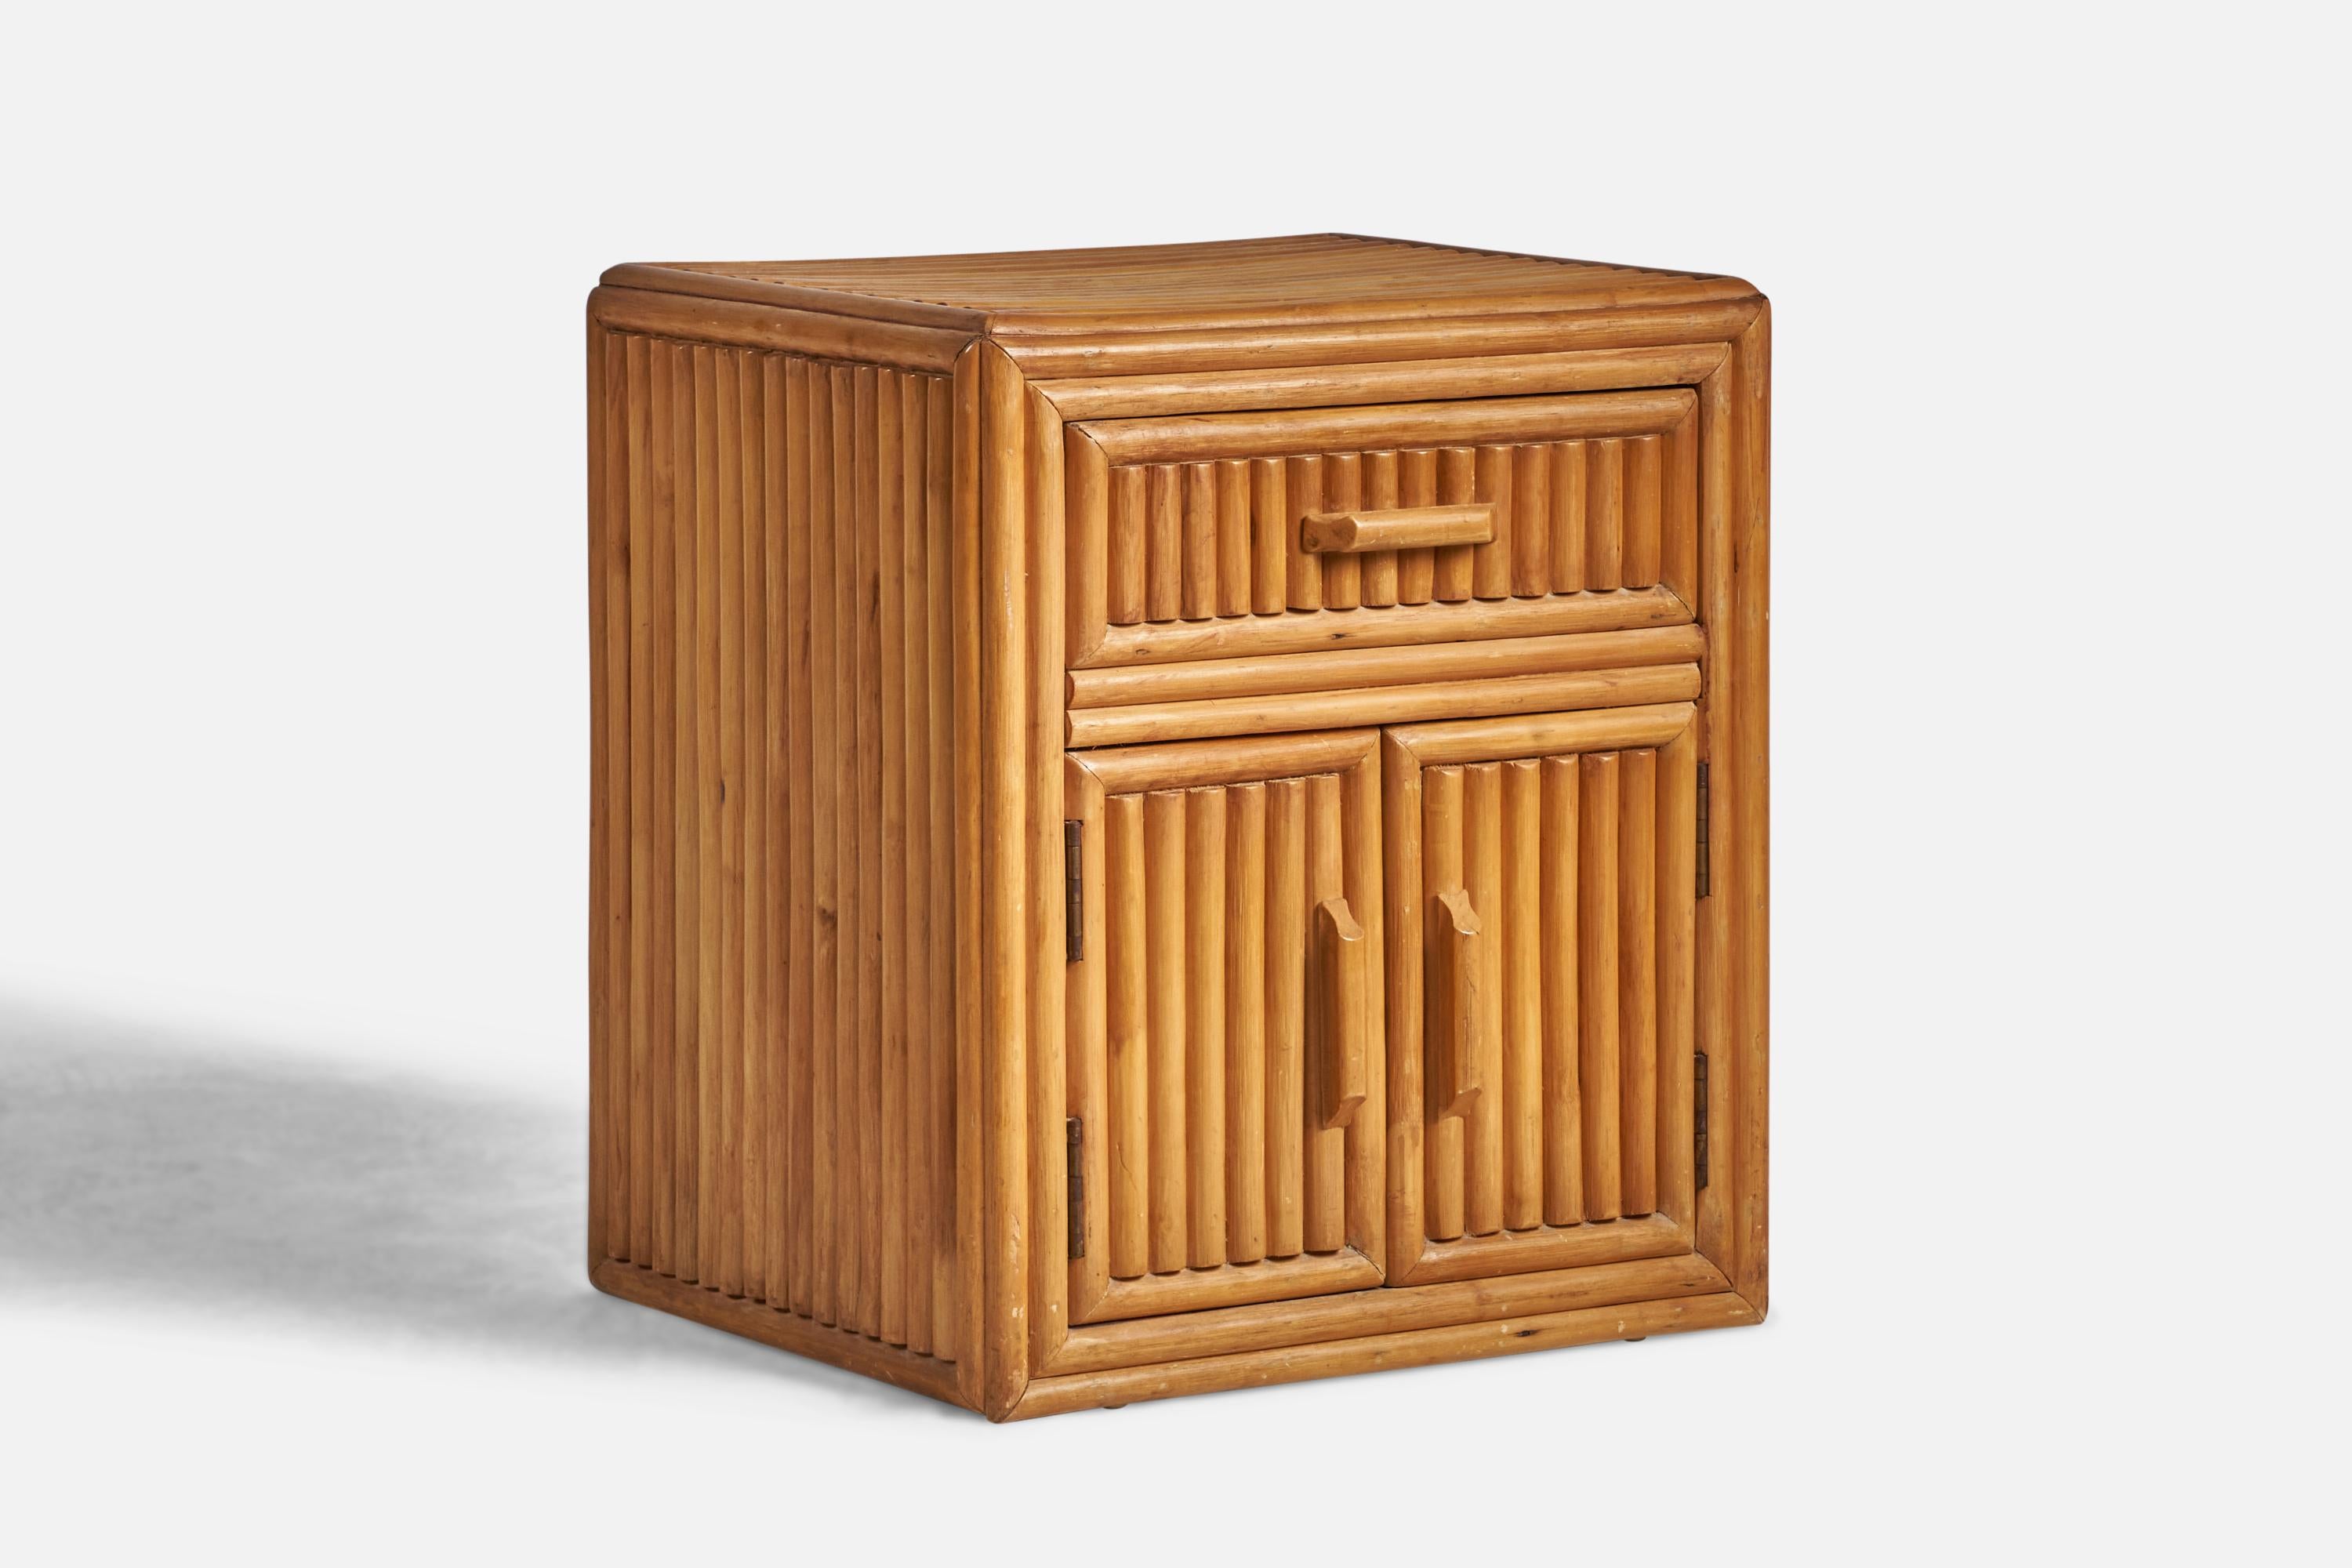 A small bamboo cabinet or nightstand designed and produced in the US, c. 1950s.